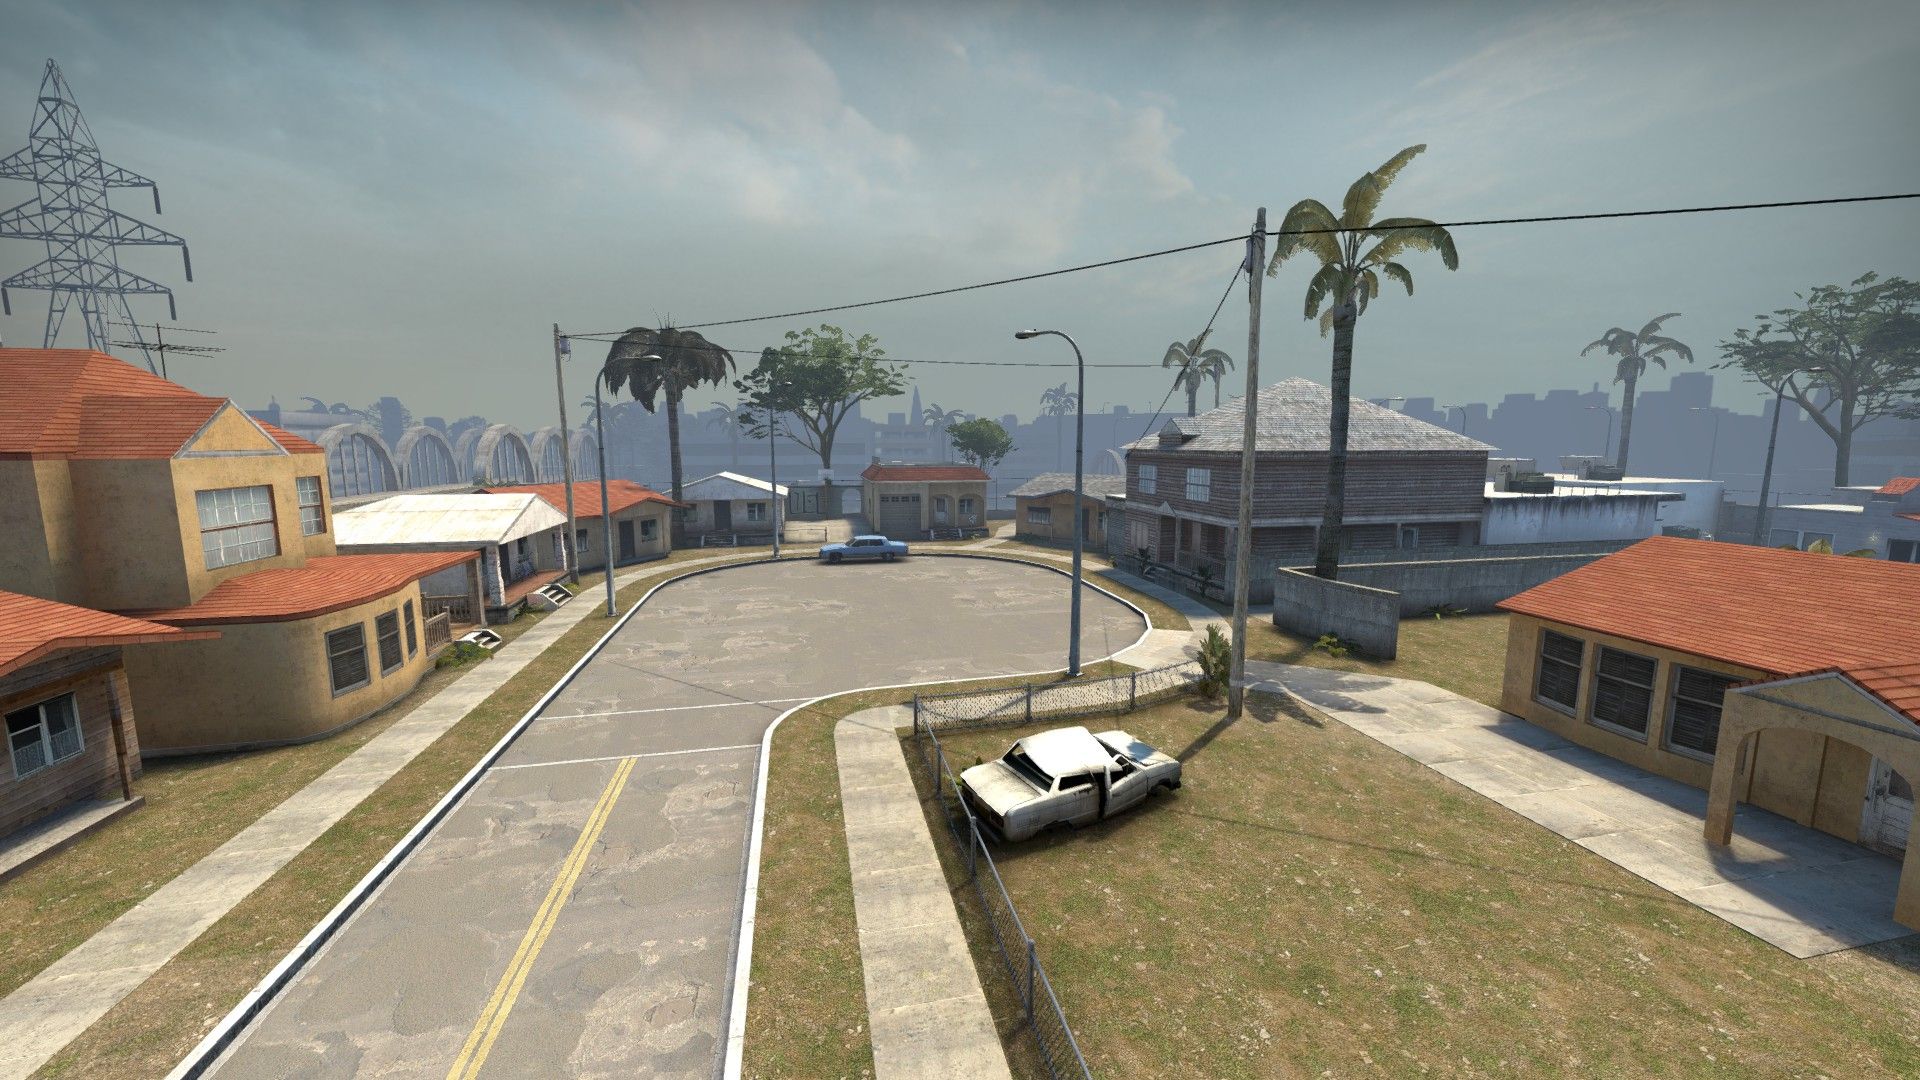 This CS:GO map takes the fight to GTA’s Grove Street